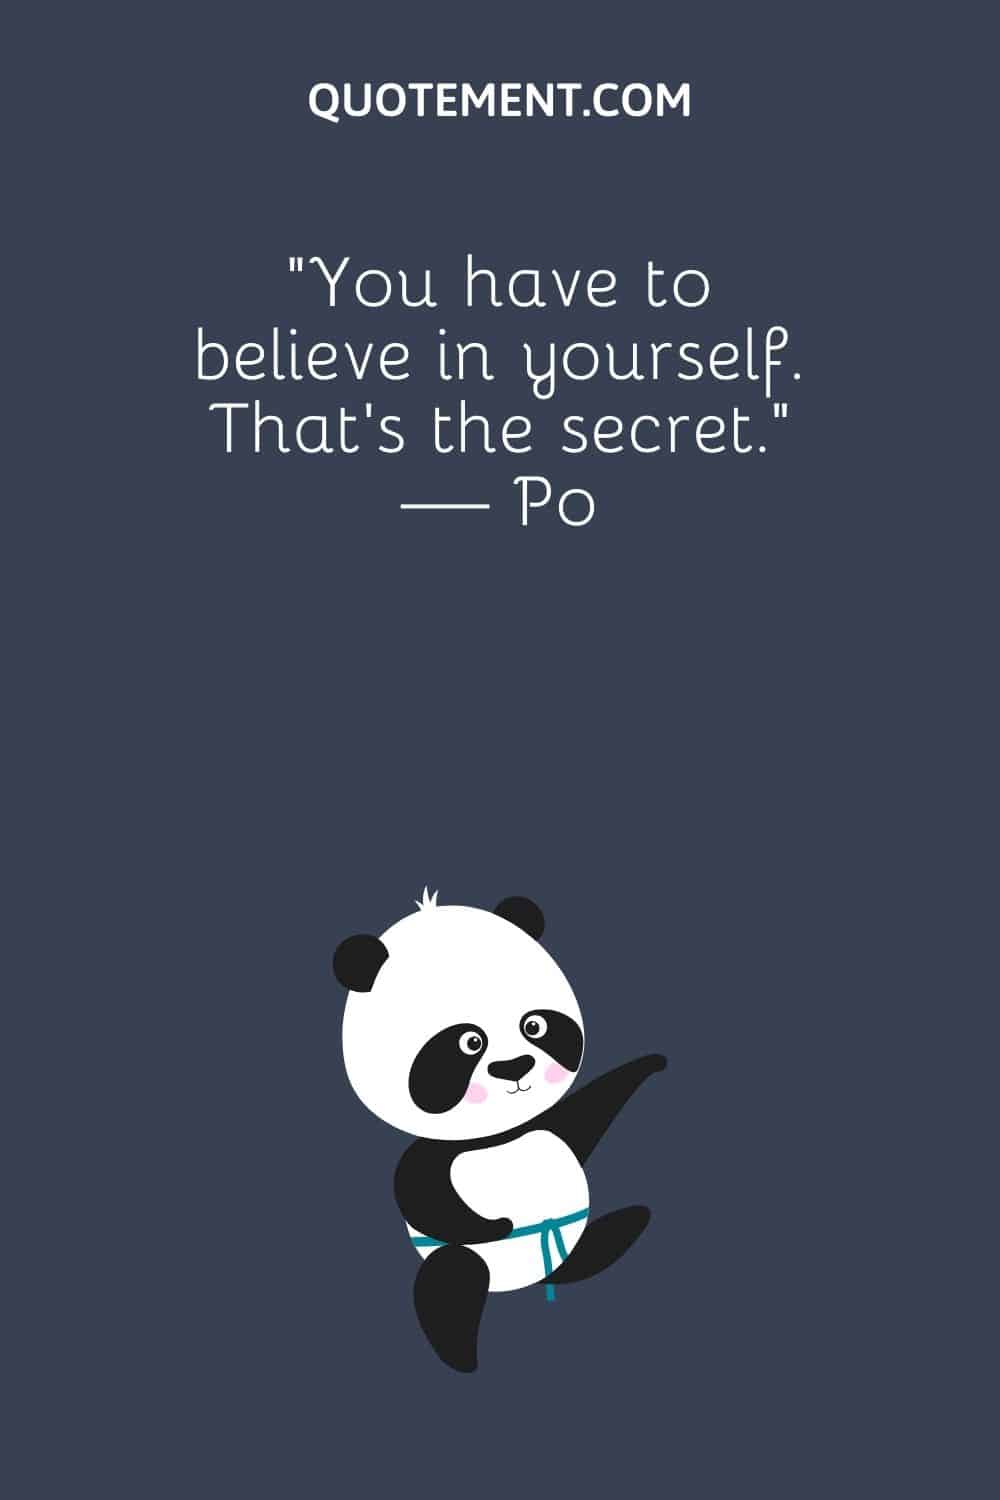 animation of a baby panda representing the best kung fu panda quote